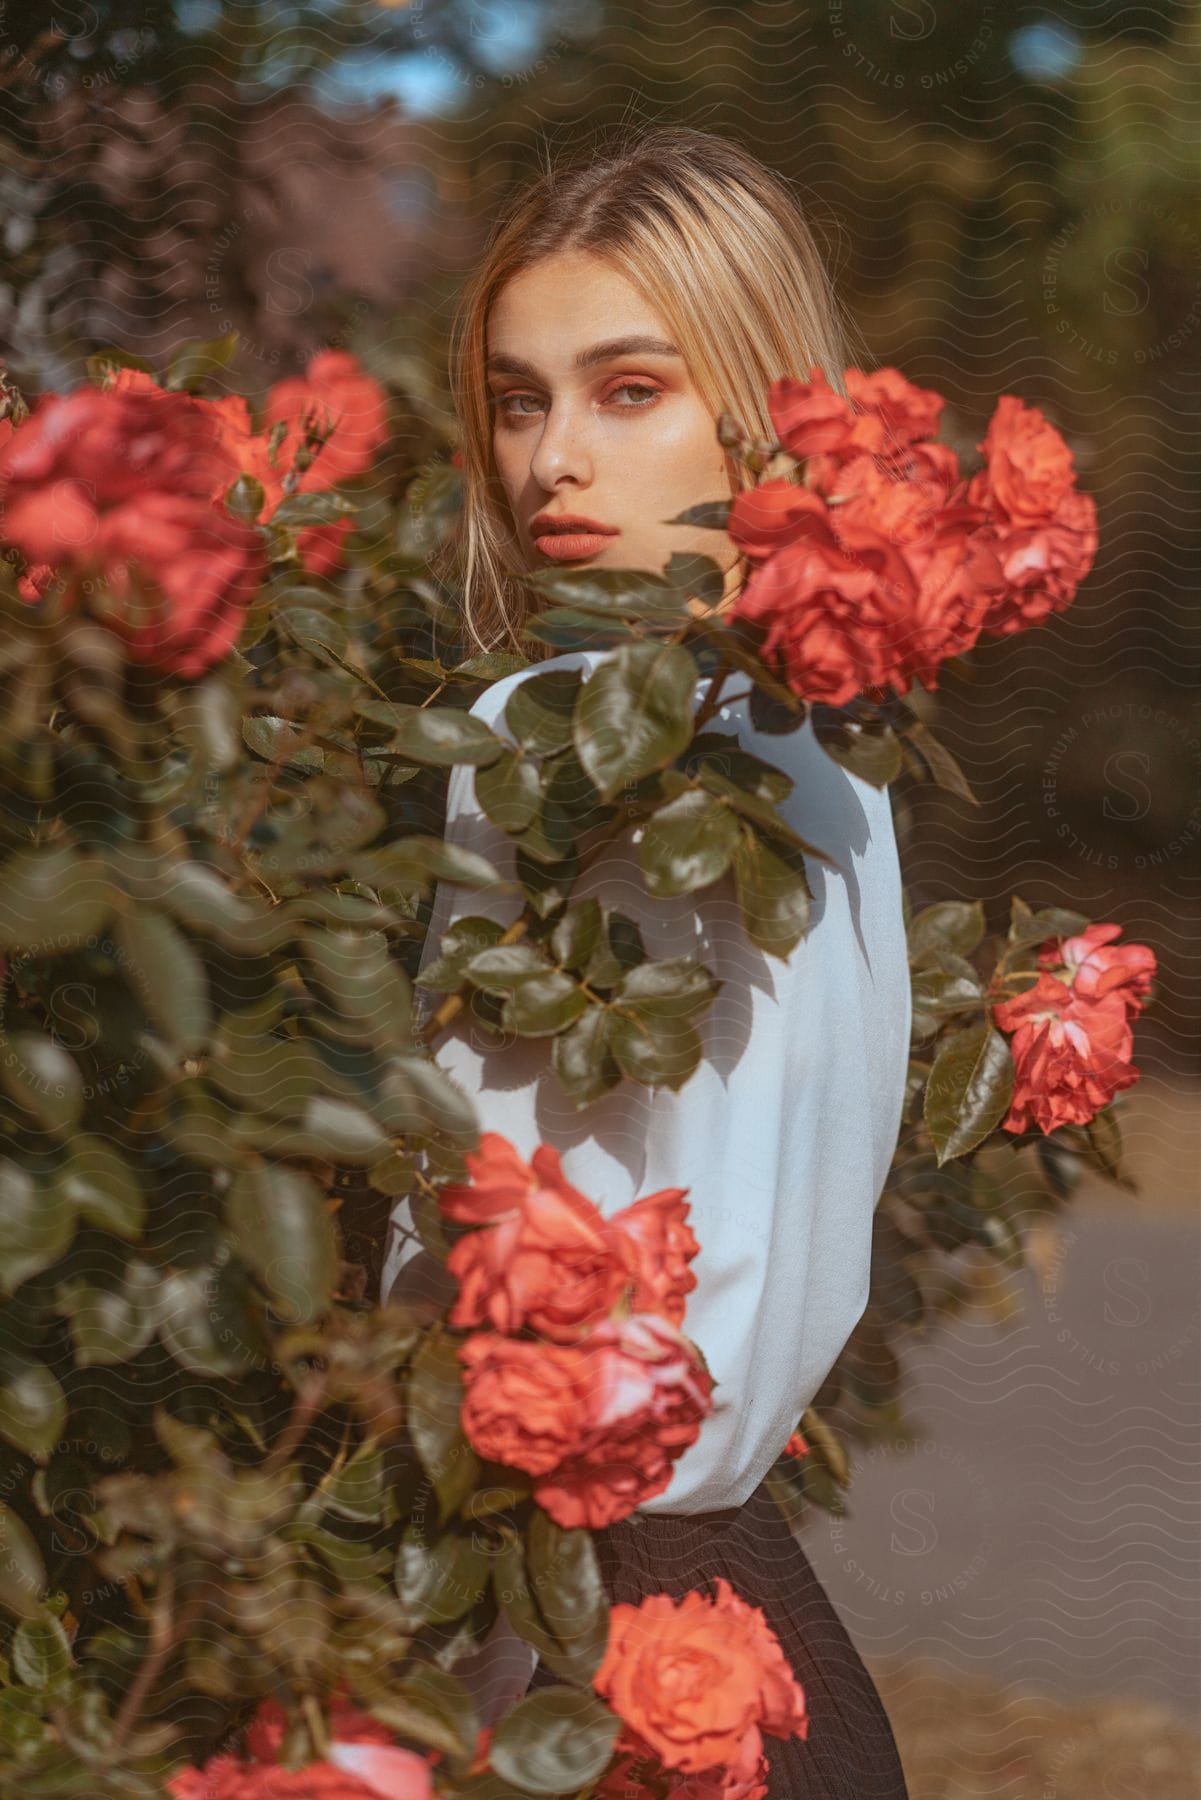 A blonde woman is standing in a flower garden as she turns and looks at the camera